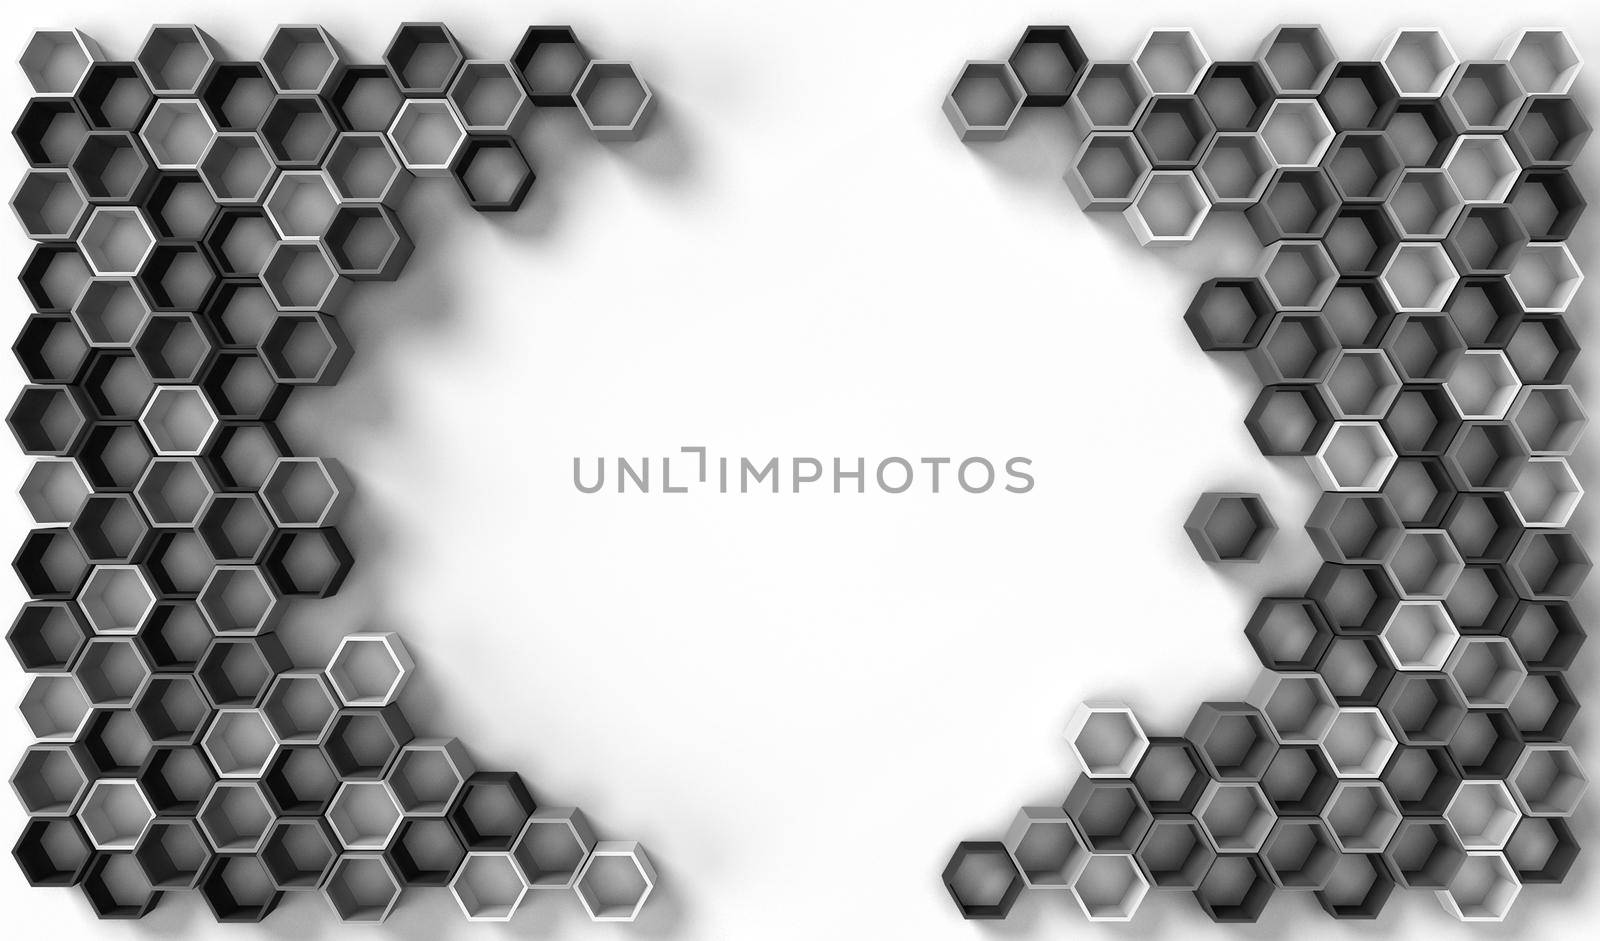 3d rendering image of hexagon solid shape on white background. 